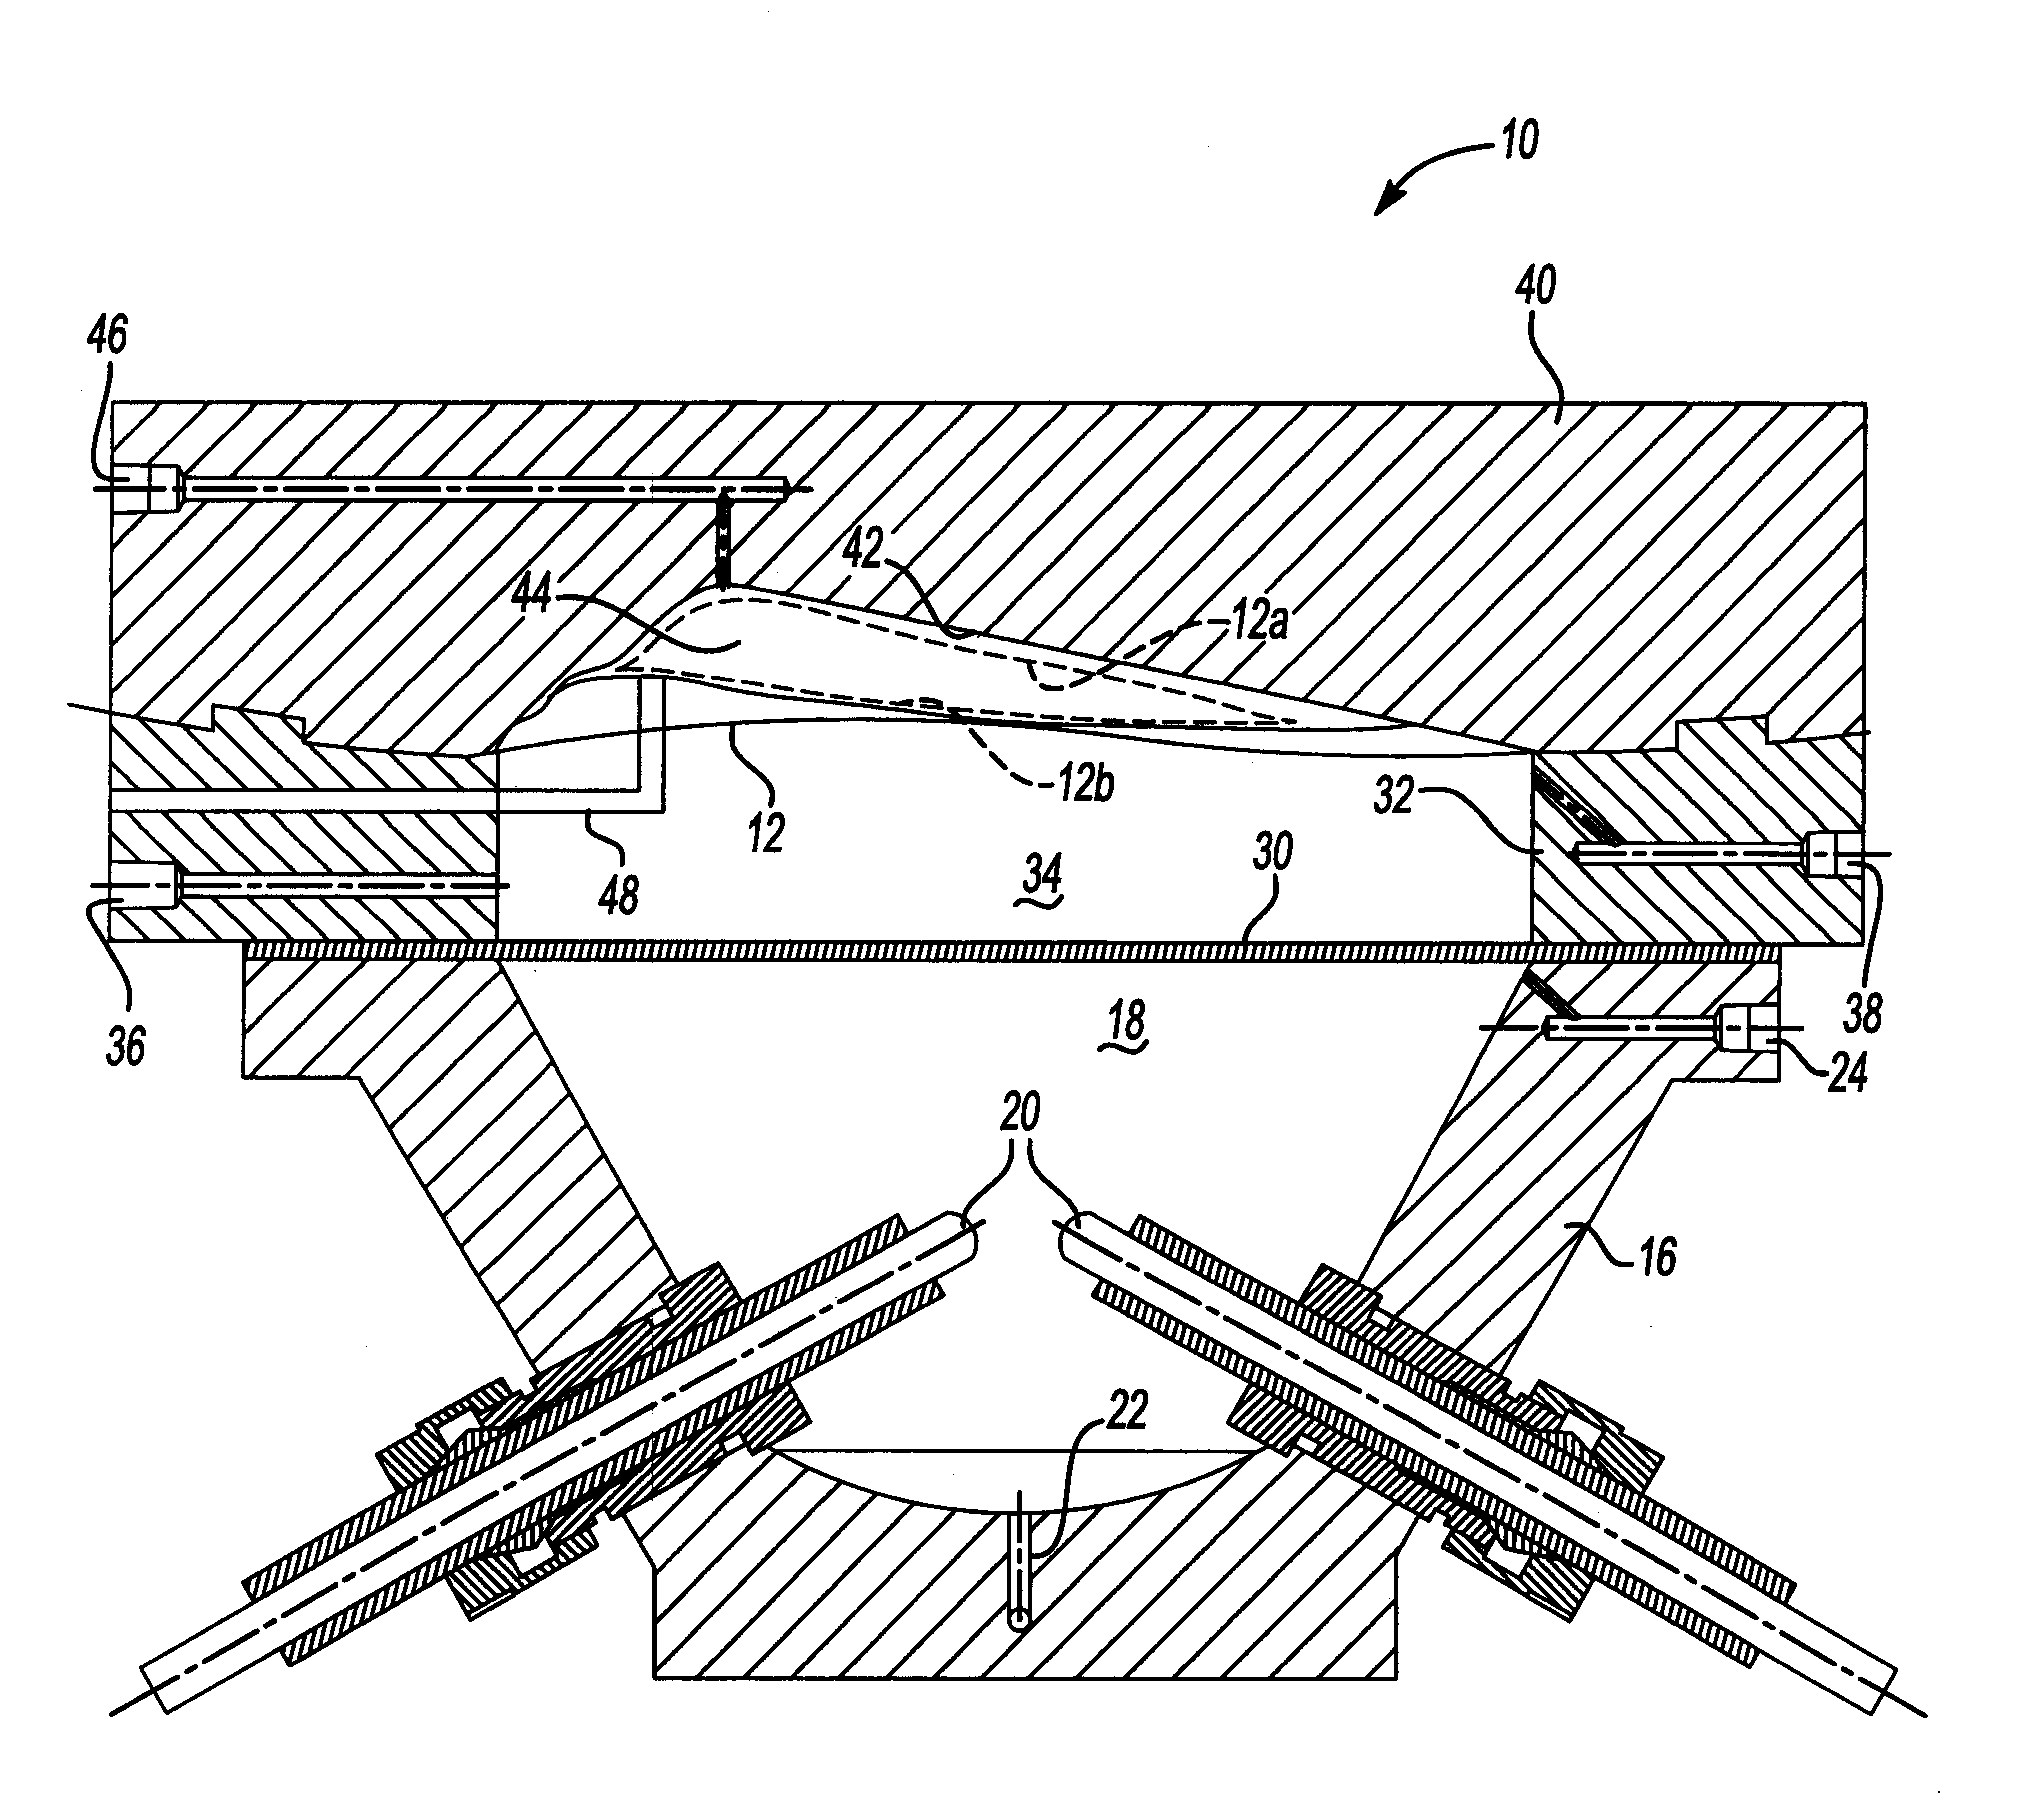 Electro-Hydraulic Forming Tool Having Two Liquid Volumes Separated by a Membrane